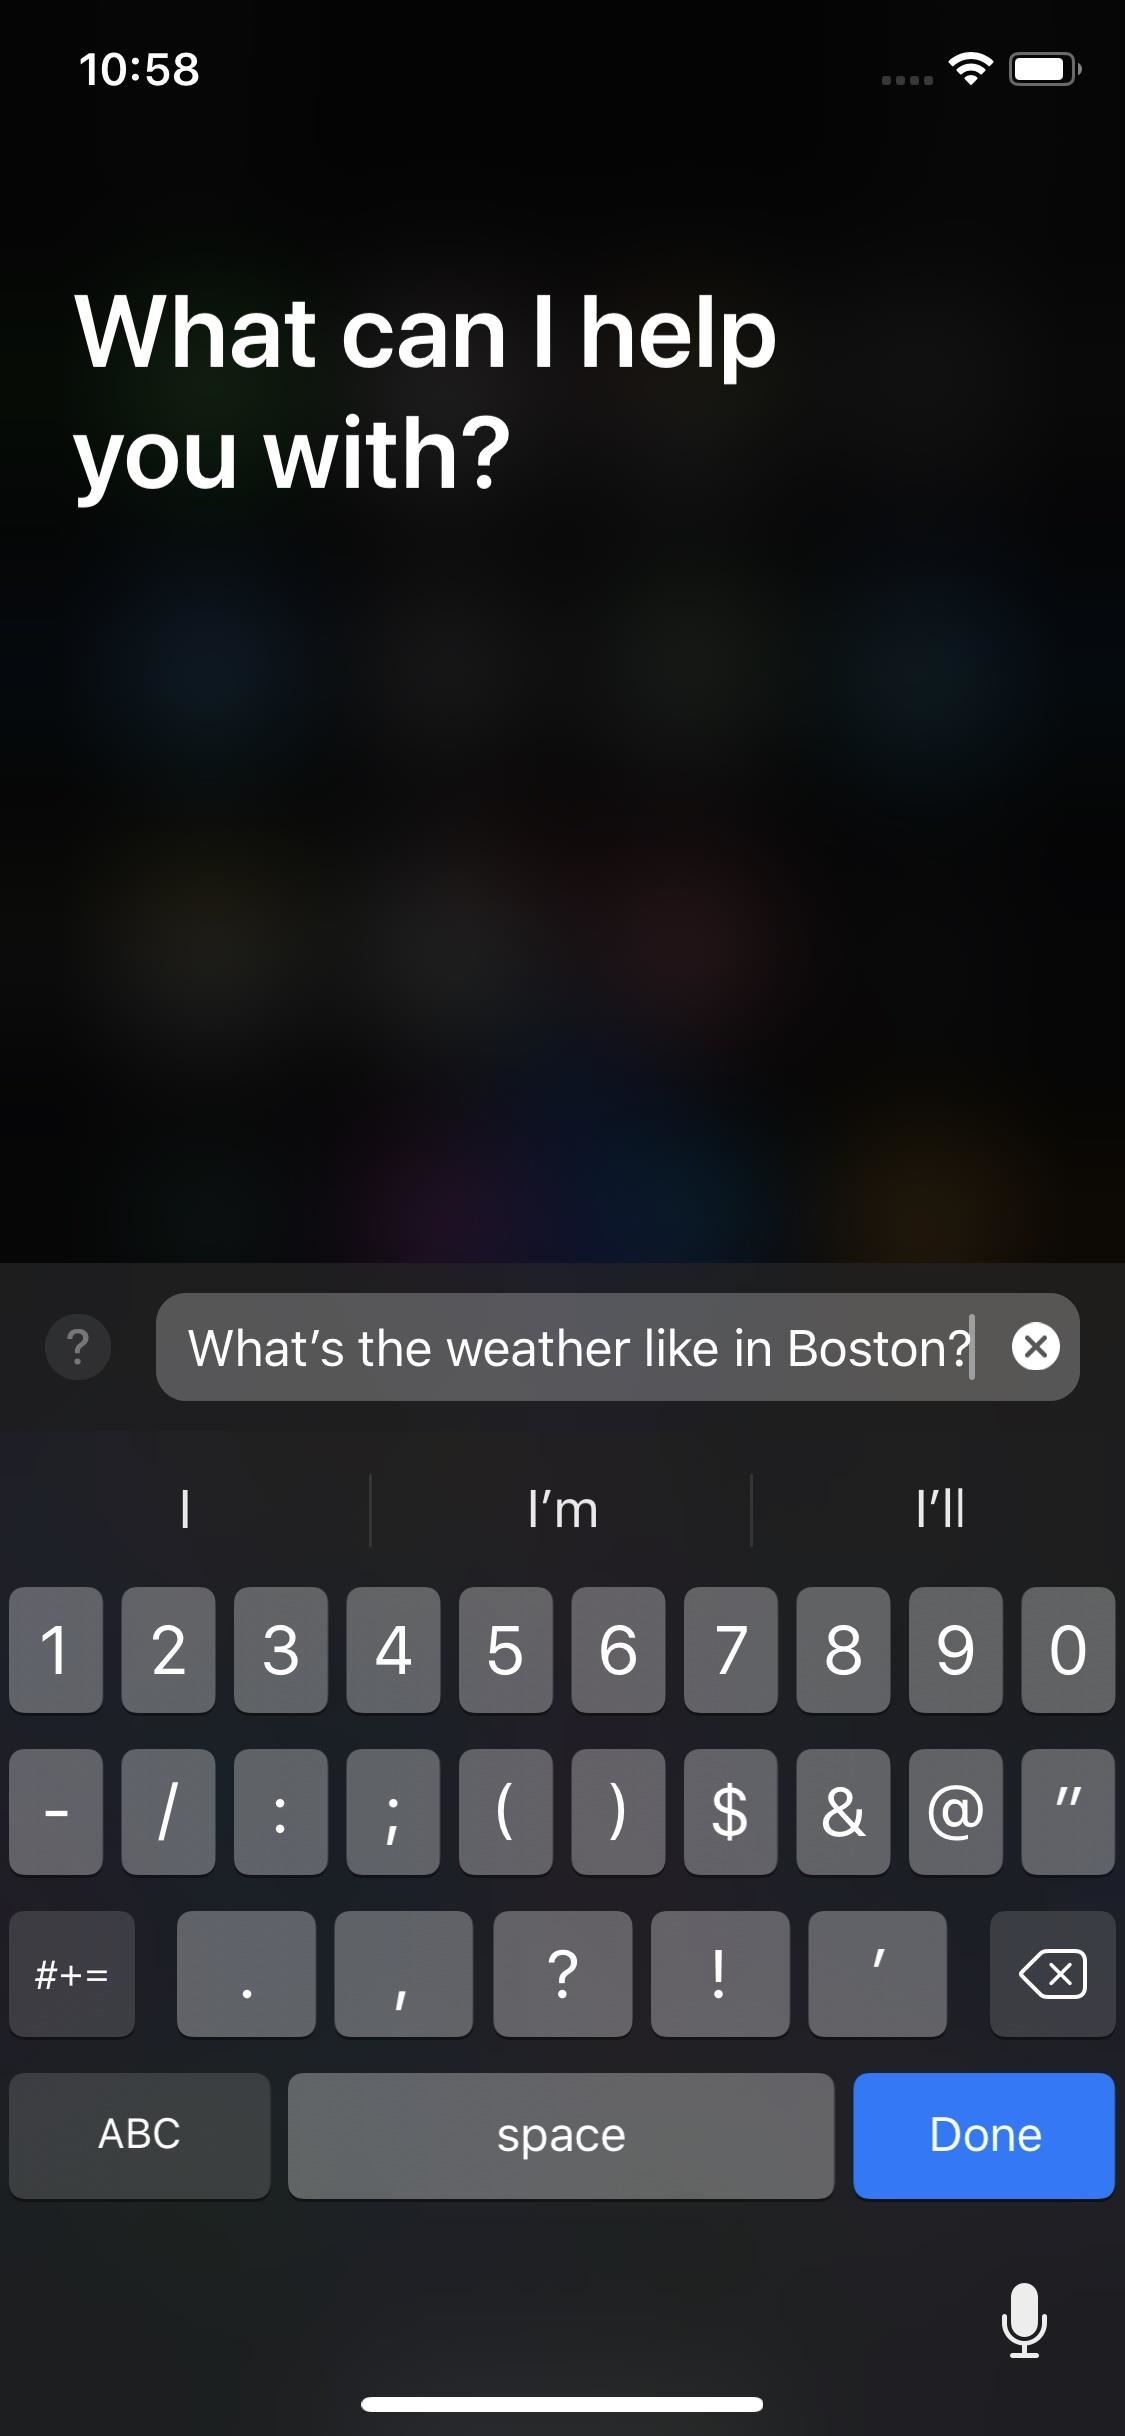 Siri Settings, Shortcuts & Hacks Every iPhone User Should Know